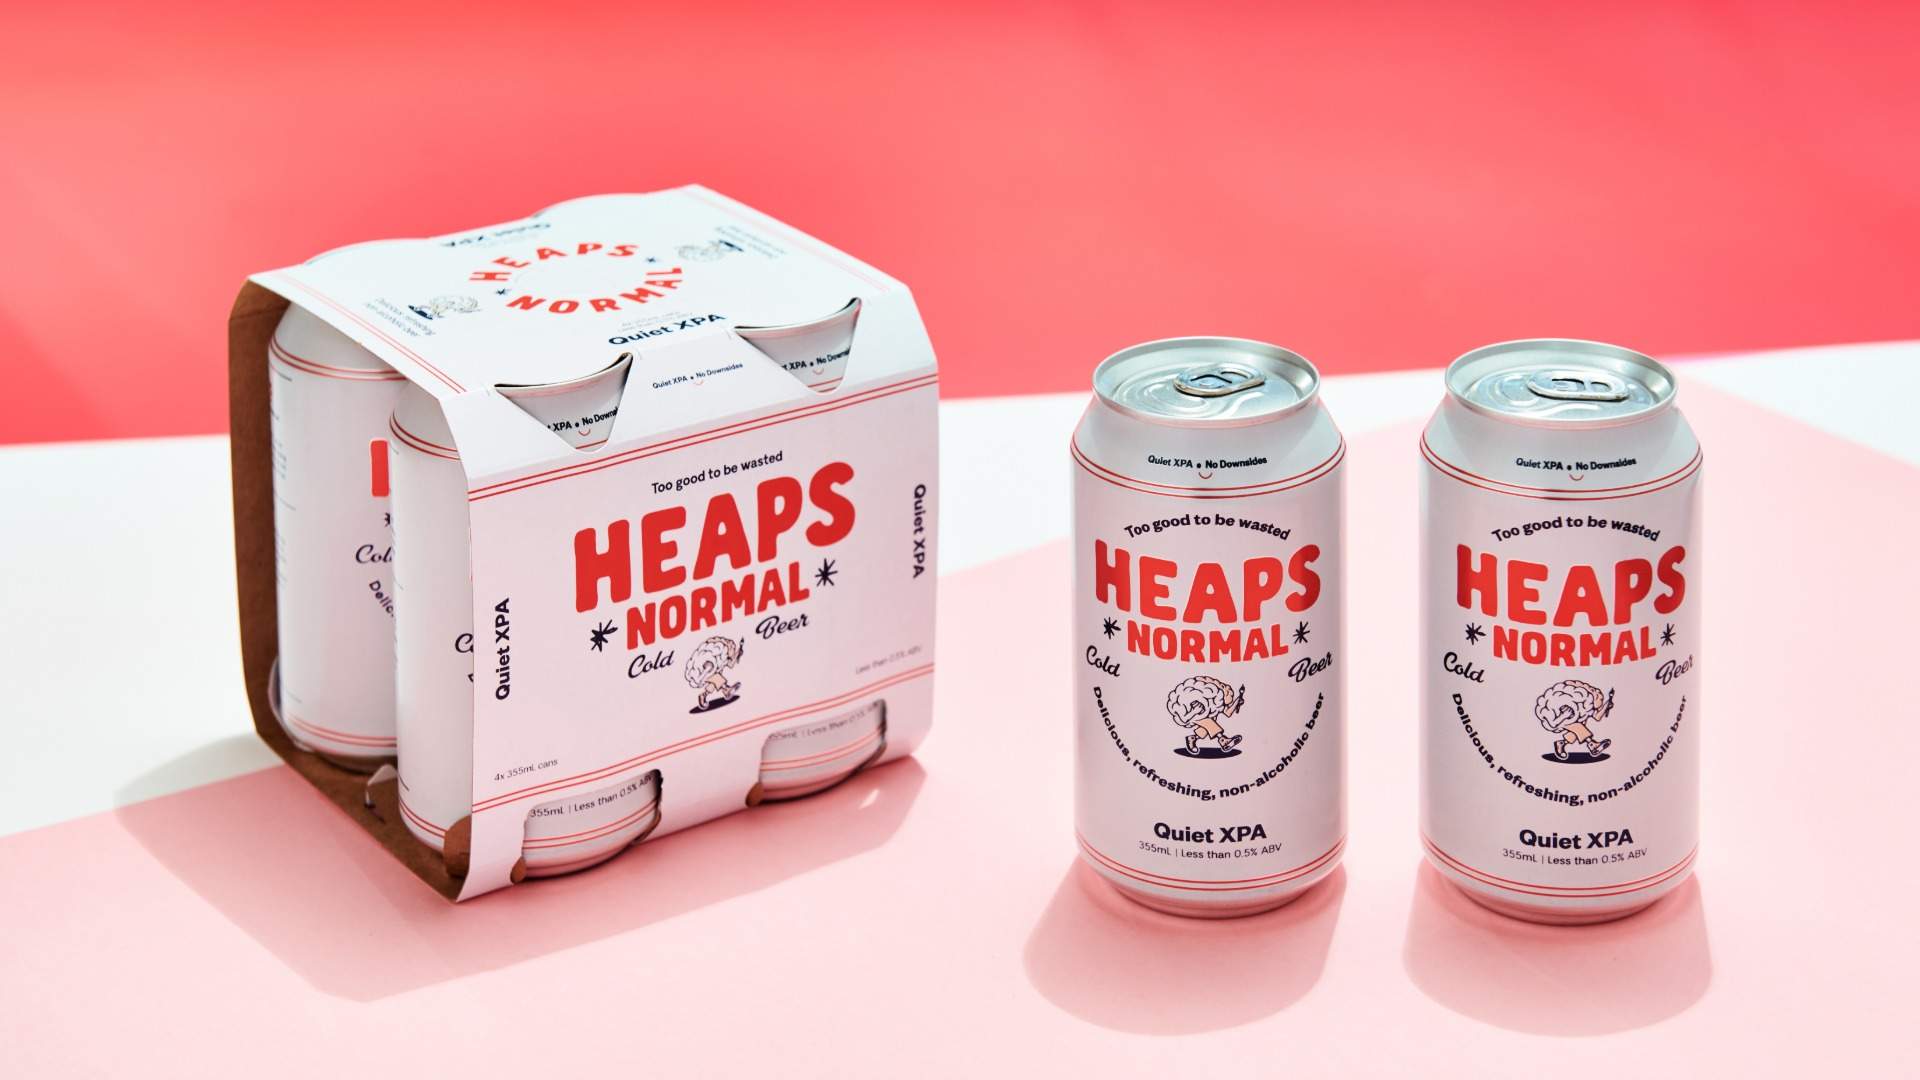 Heaps Normal non-alcoholic beer